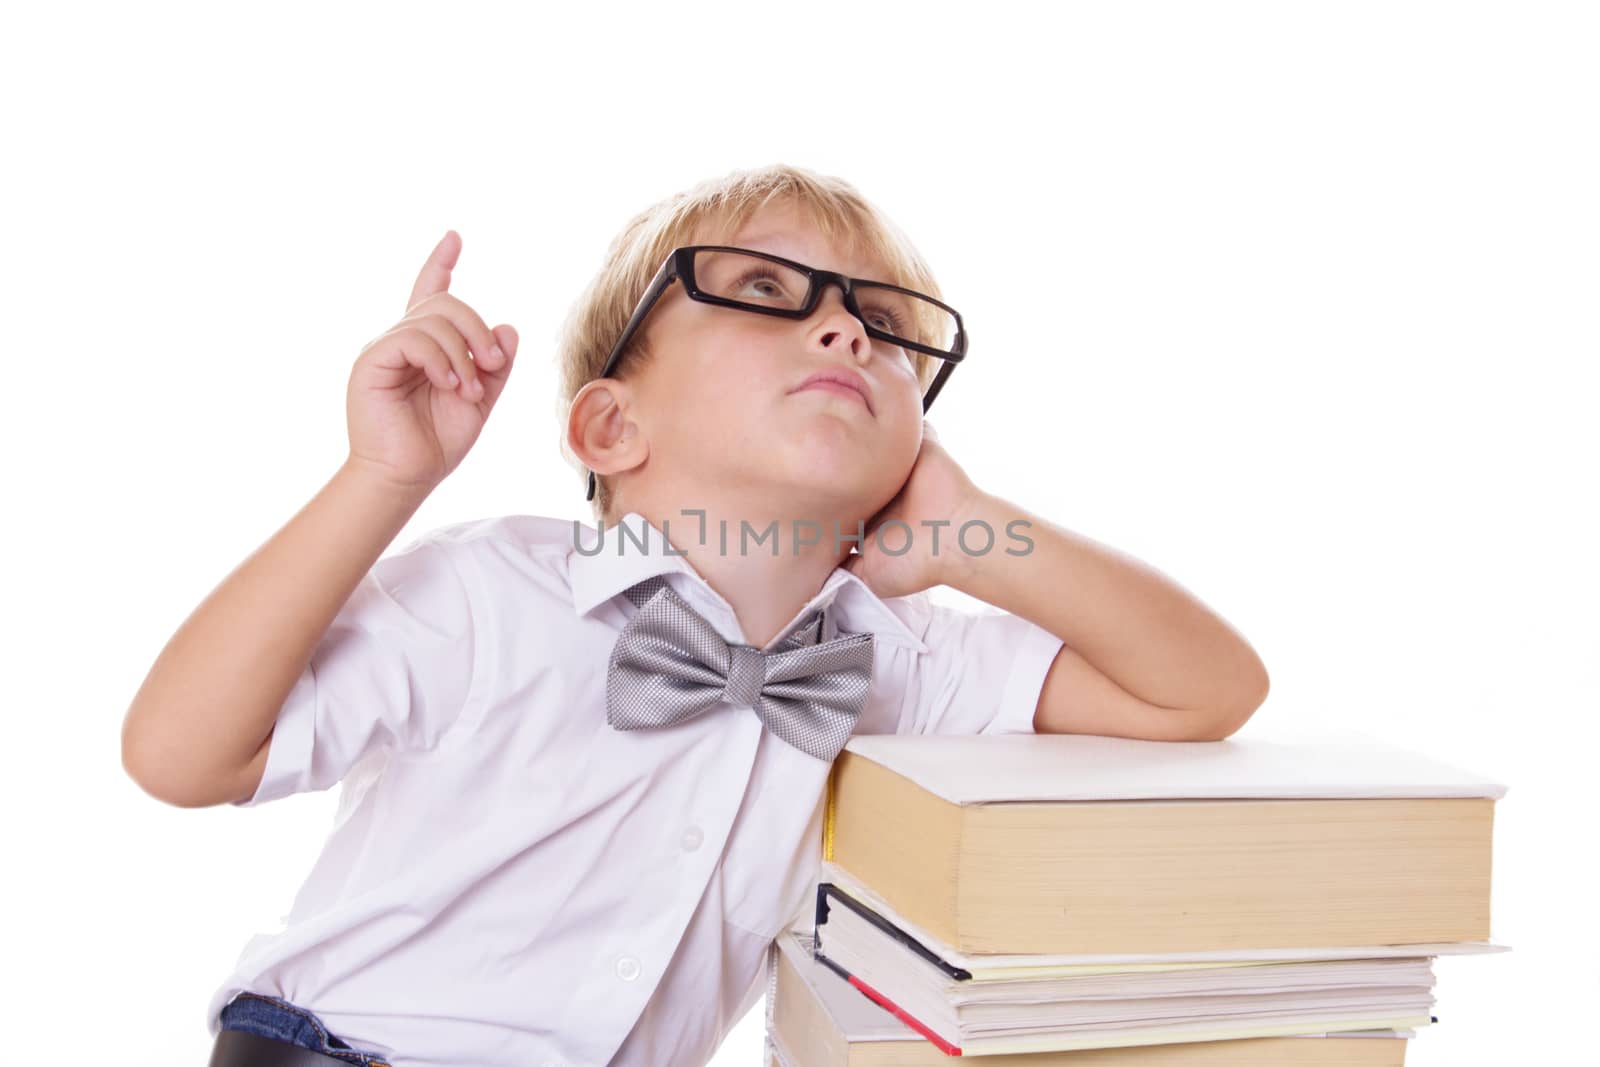 Boy with bow-tie and glasses sitting on books raising finger up over white